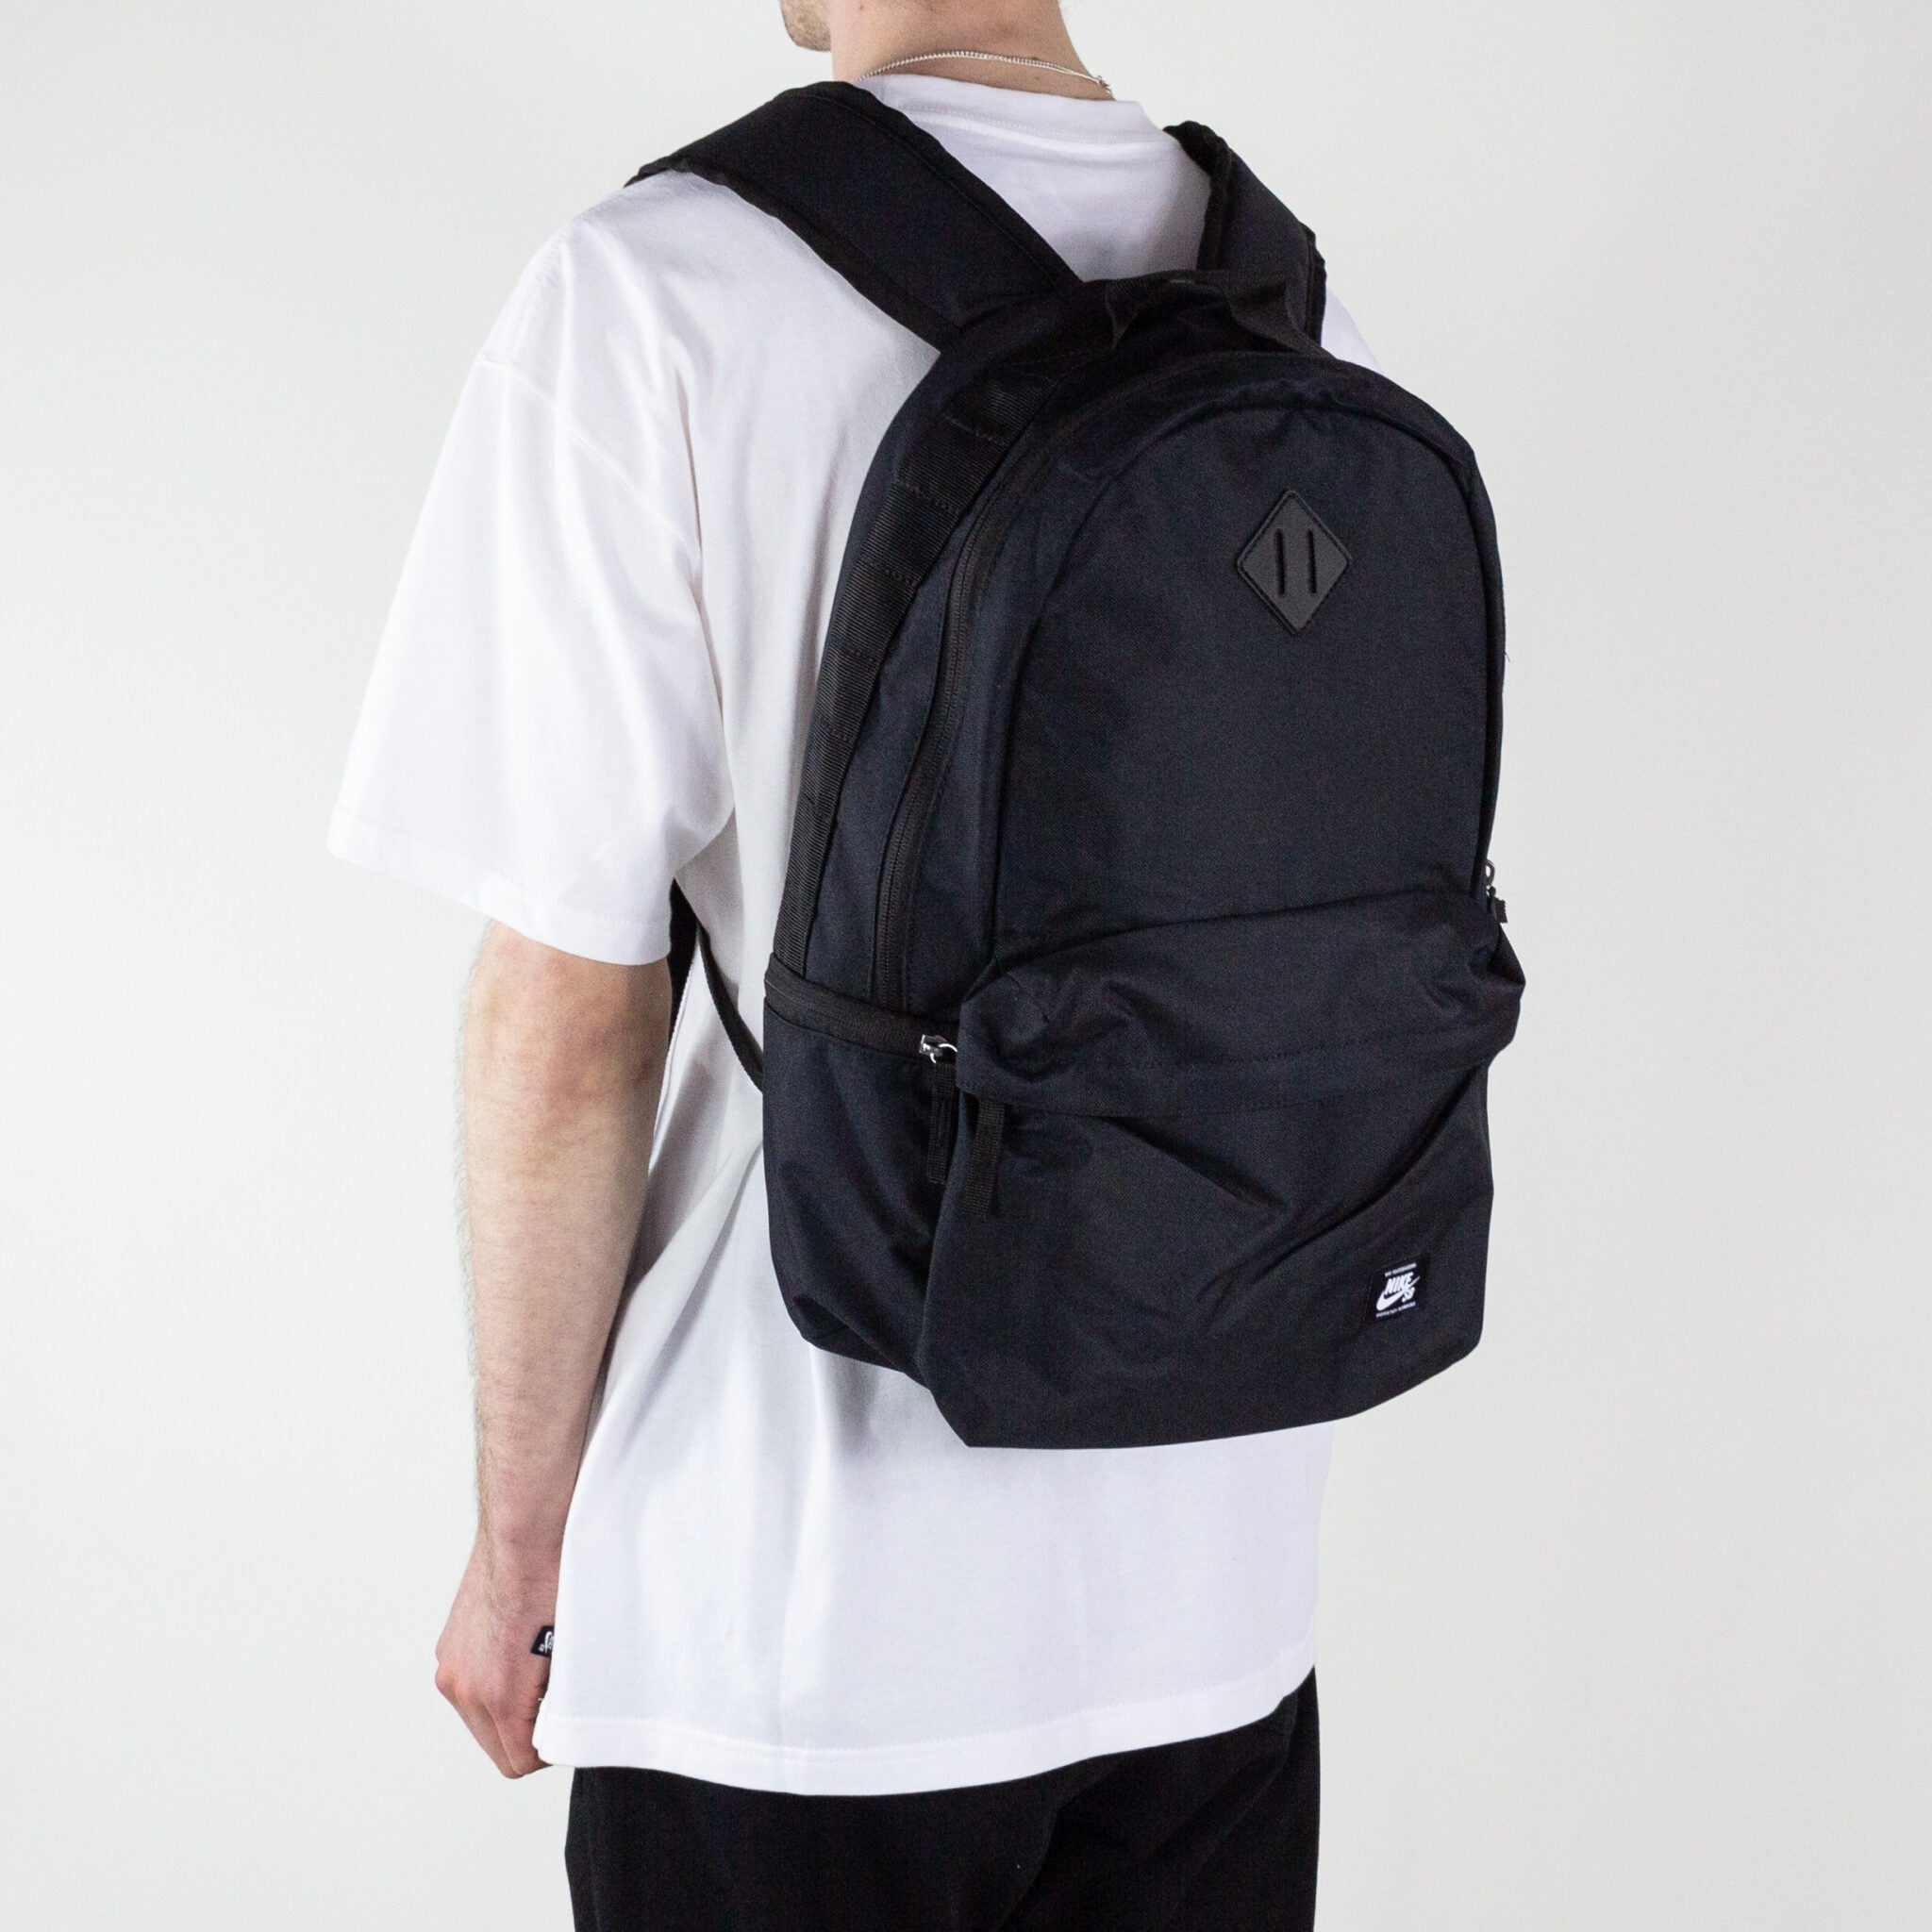 Vástago Insustituible verbo Nike SB Icon Backpack-Black – Remix Casuals